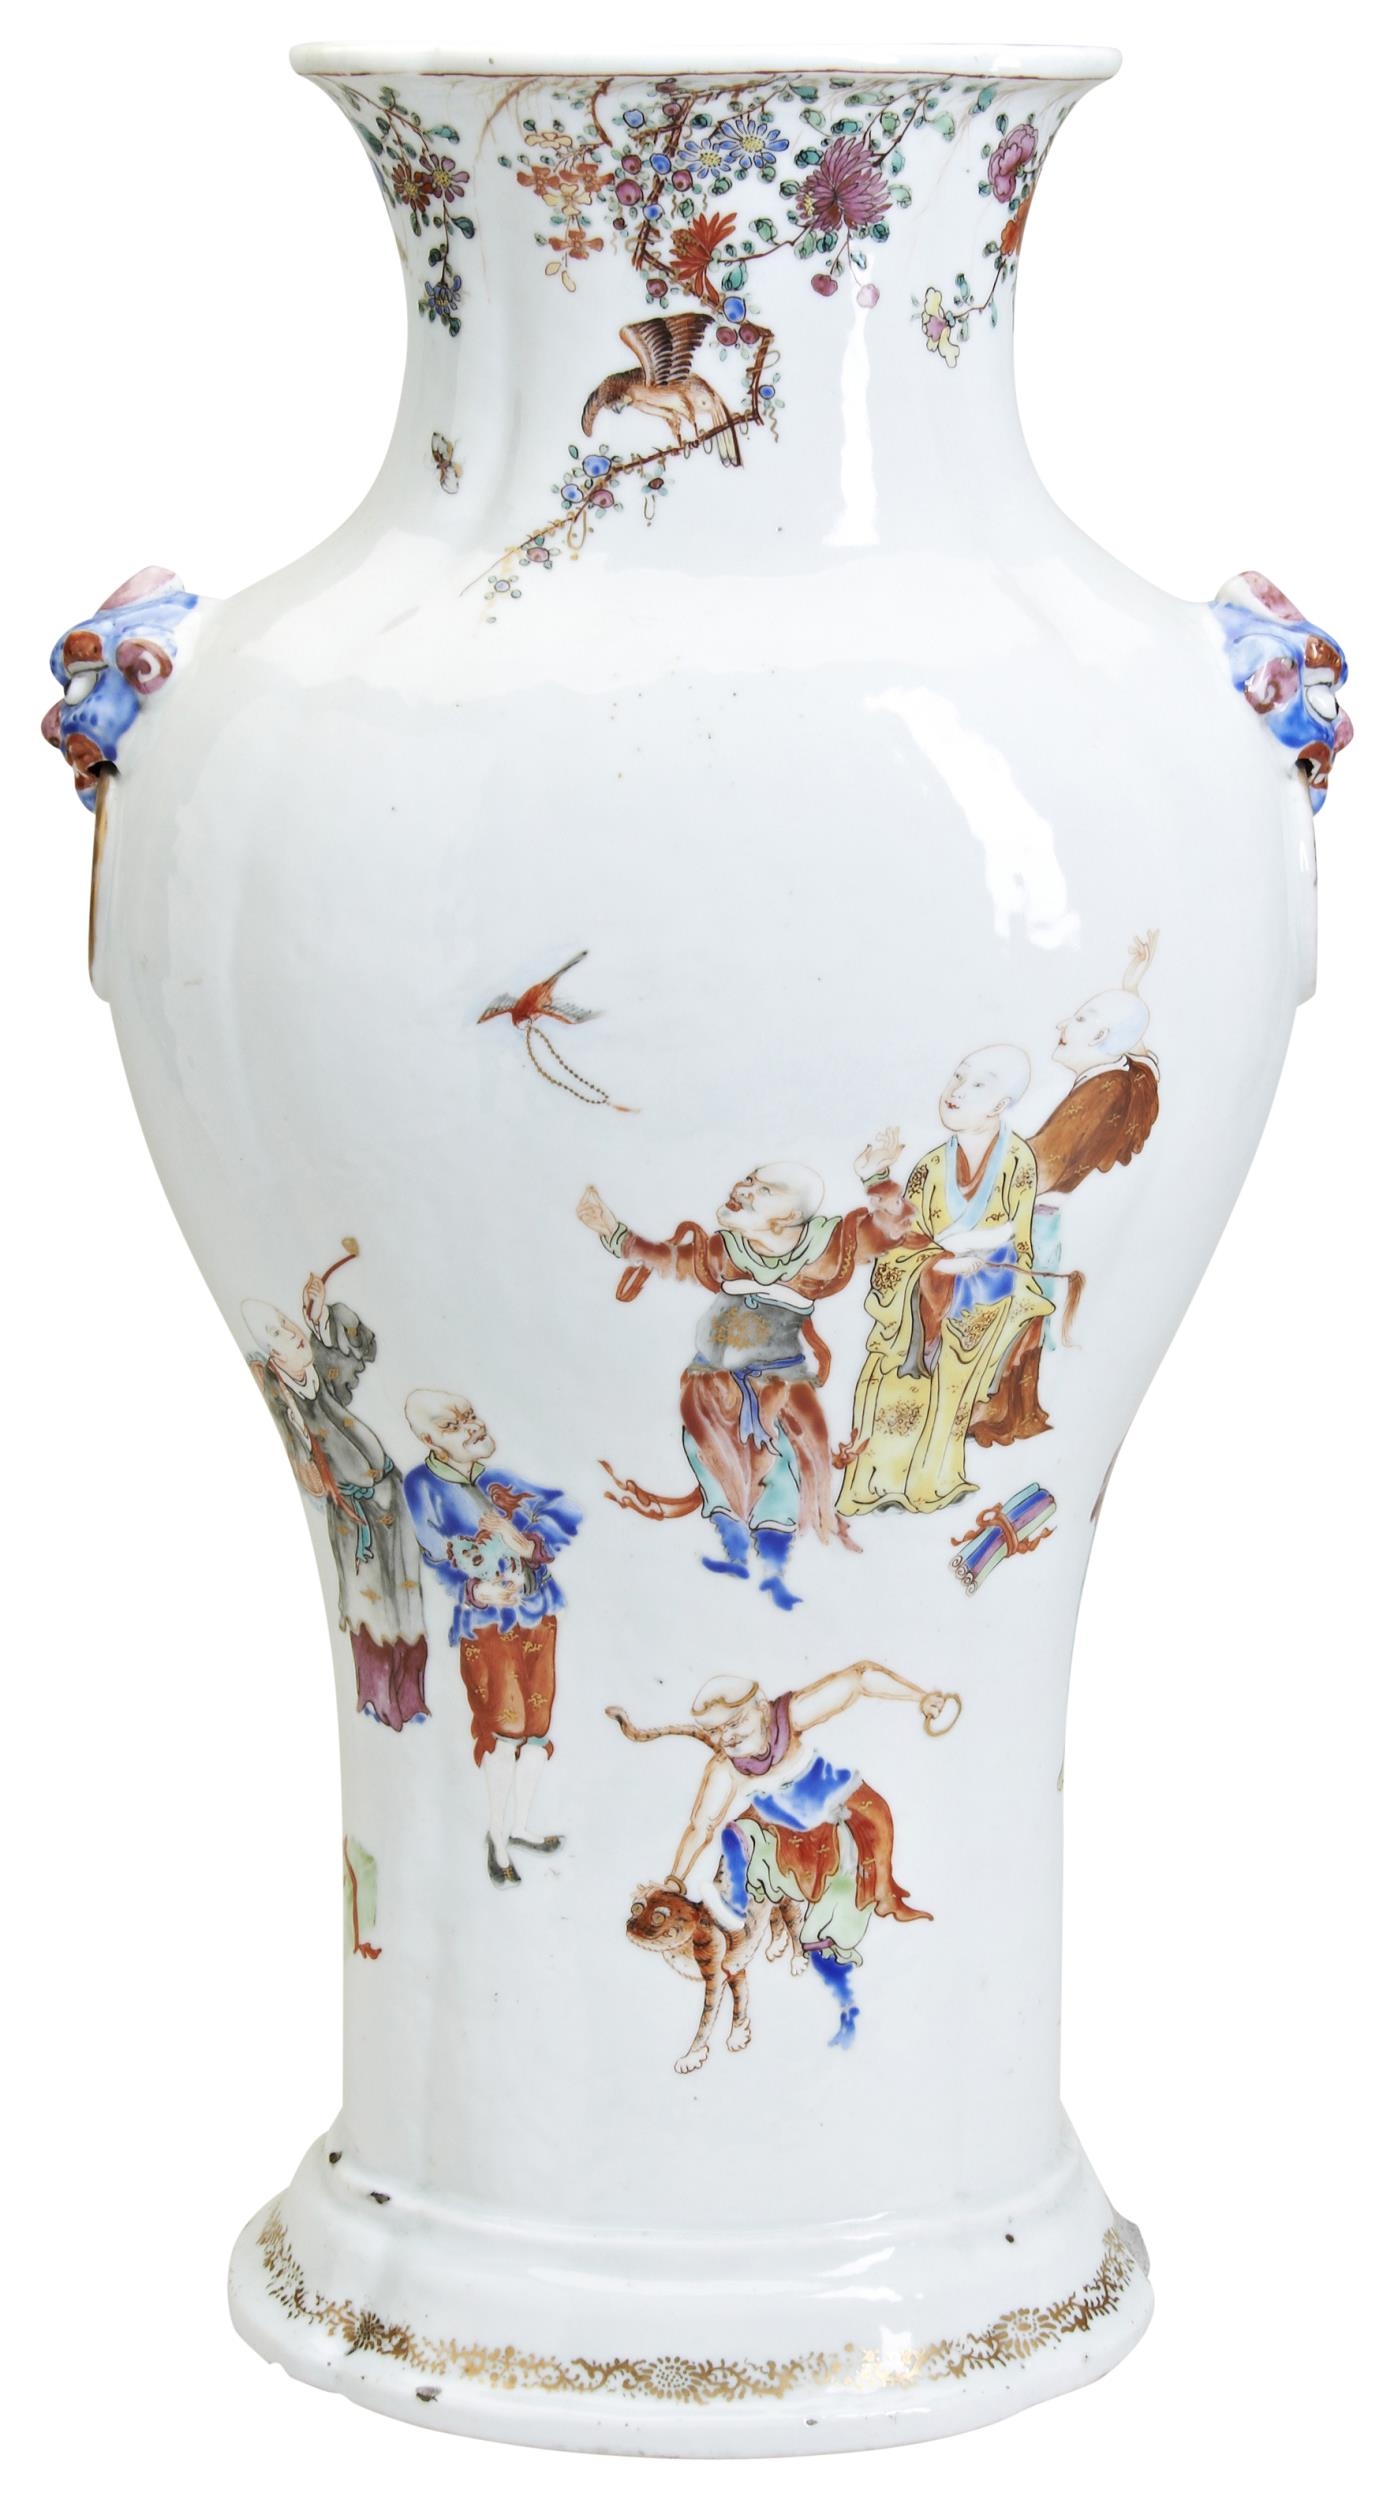 A LARGE FAMILLE ROSE BALUSTER VASE QIANLONG PERIOD (1736-1795) 清 乾隆粉彩 十八罗汉狮耳瓶 the moulded